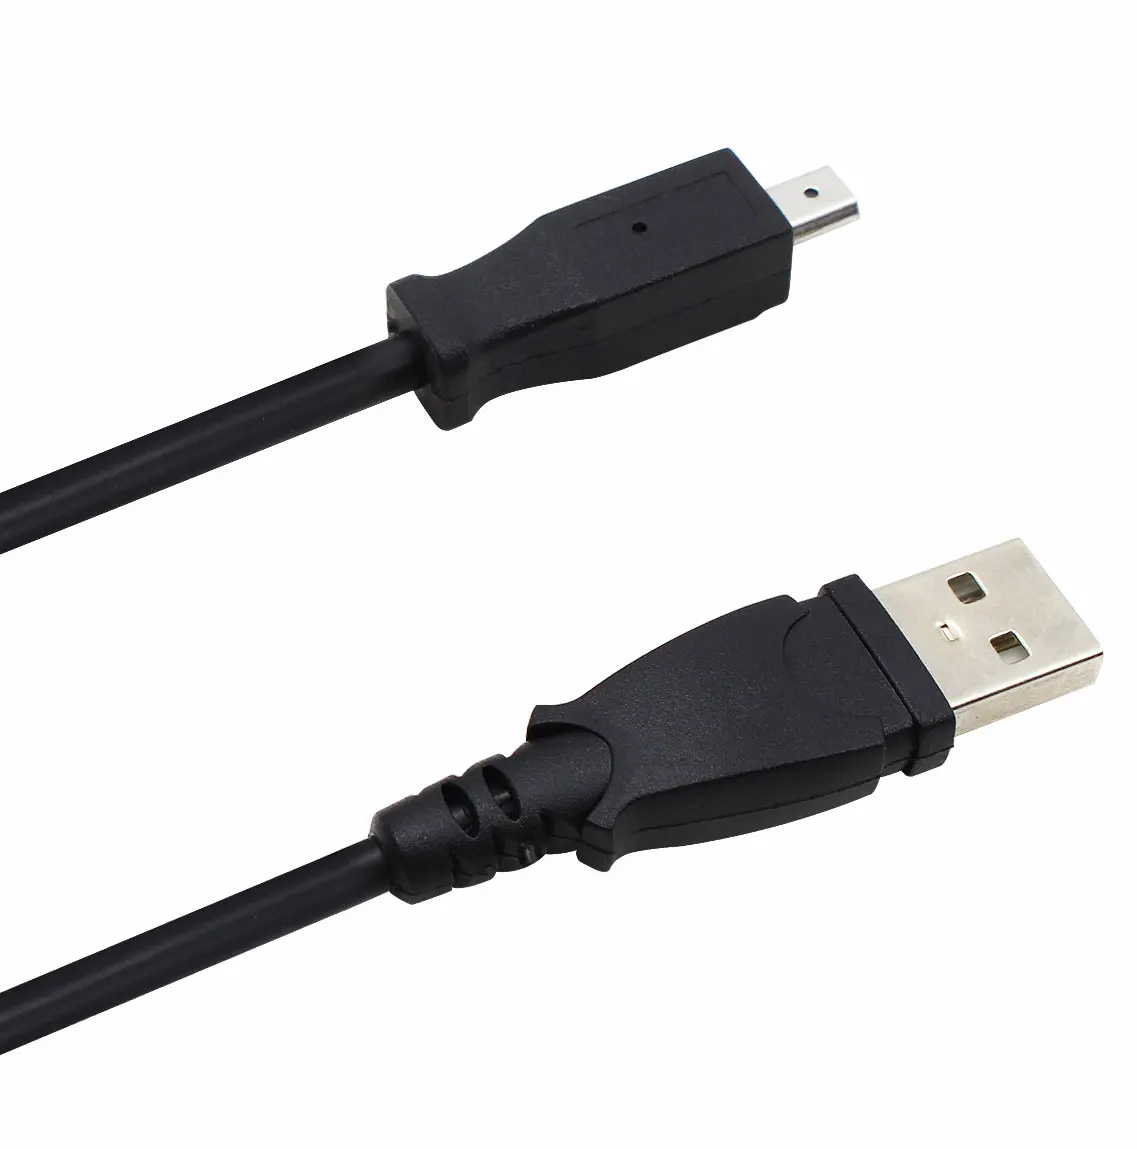 USB Charger Cable Data Sync Transfer Lead for Kodak EasyShare M575 M550 M530 